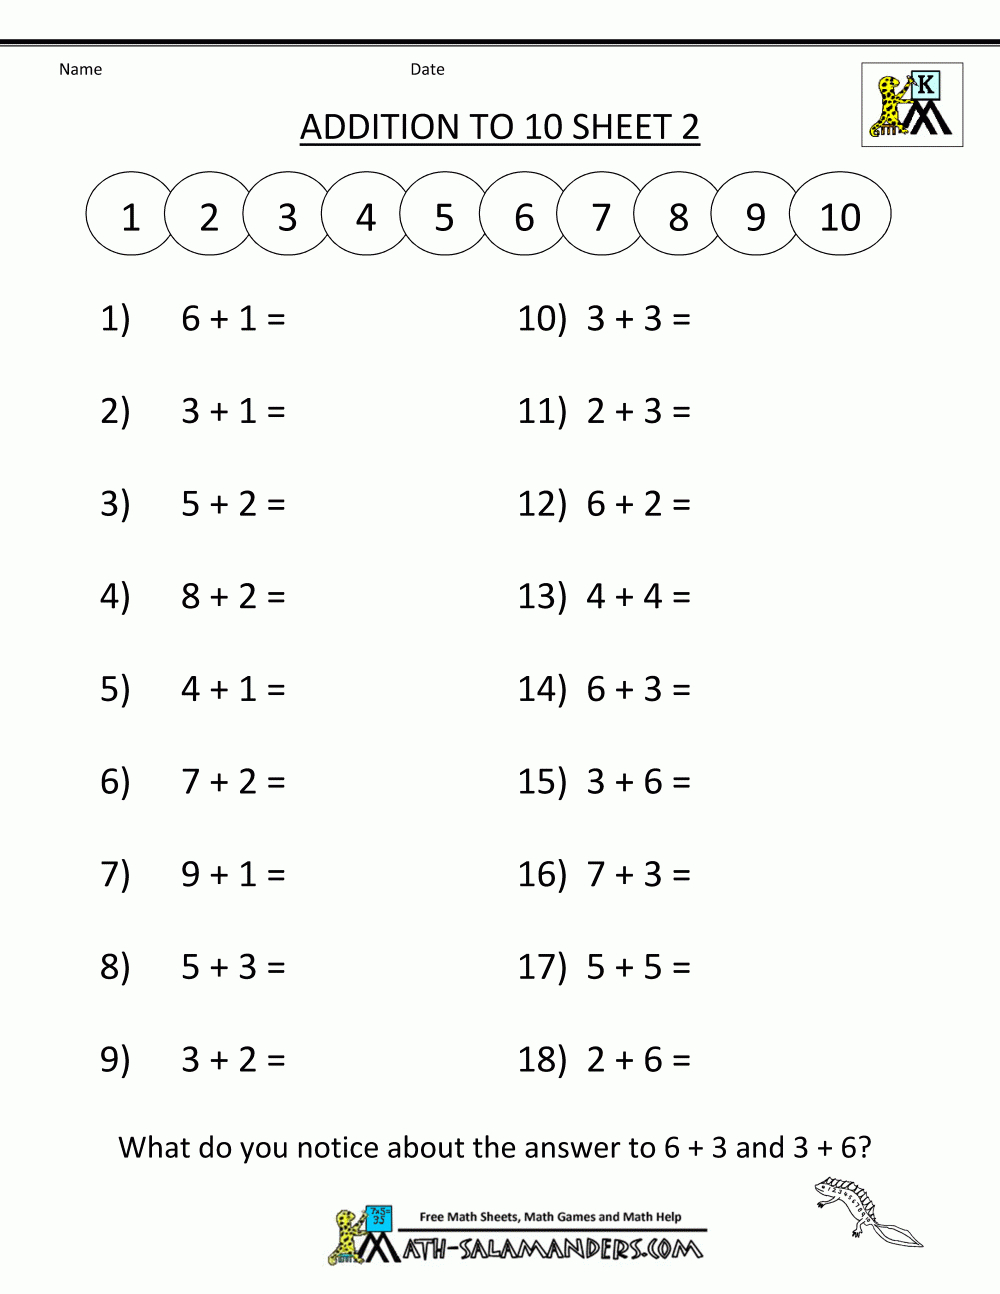 Free Online Math Worksheets Addition To 10 2 | Addition throughout Multiplication Worksheets Online